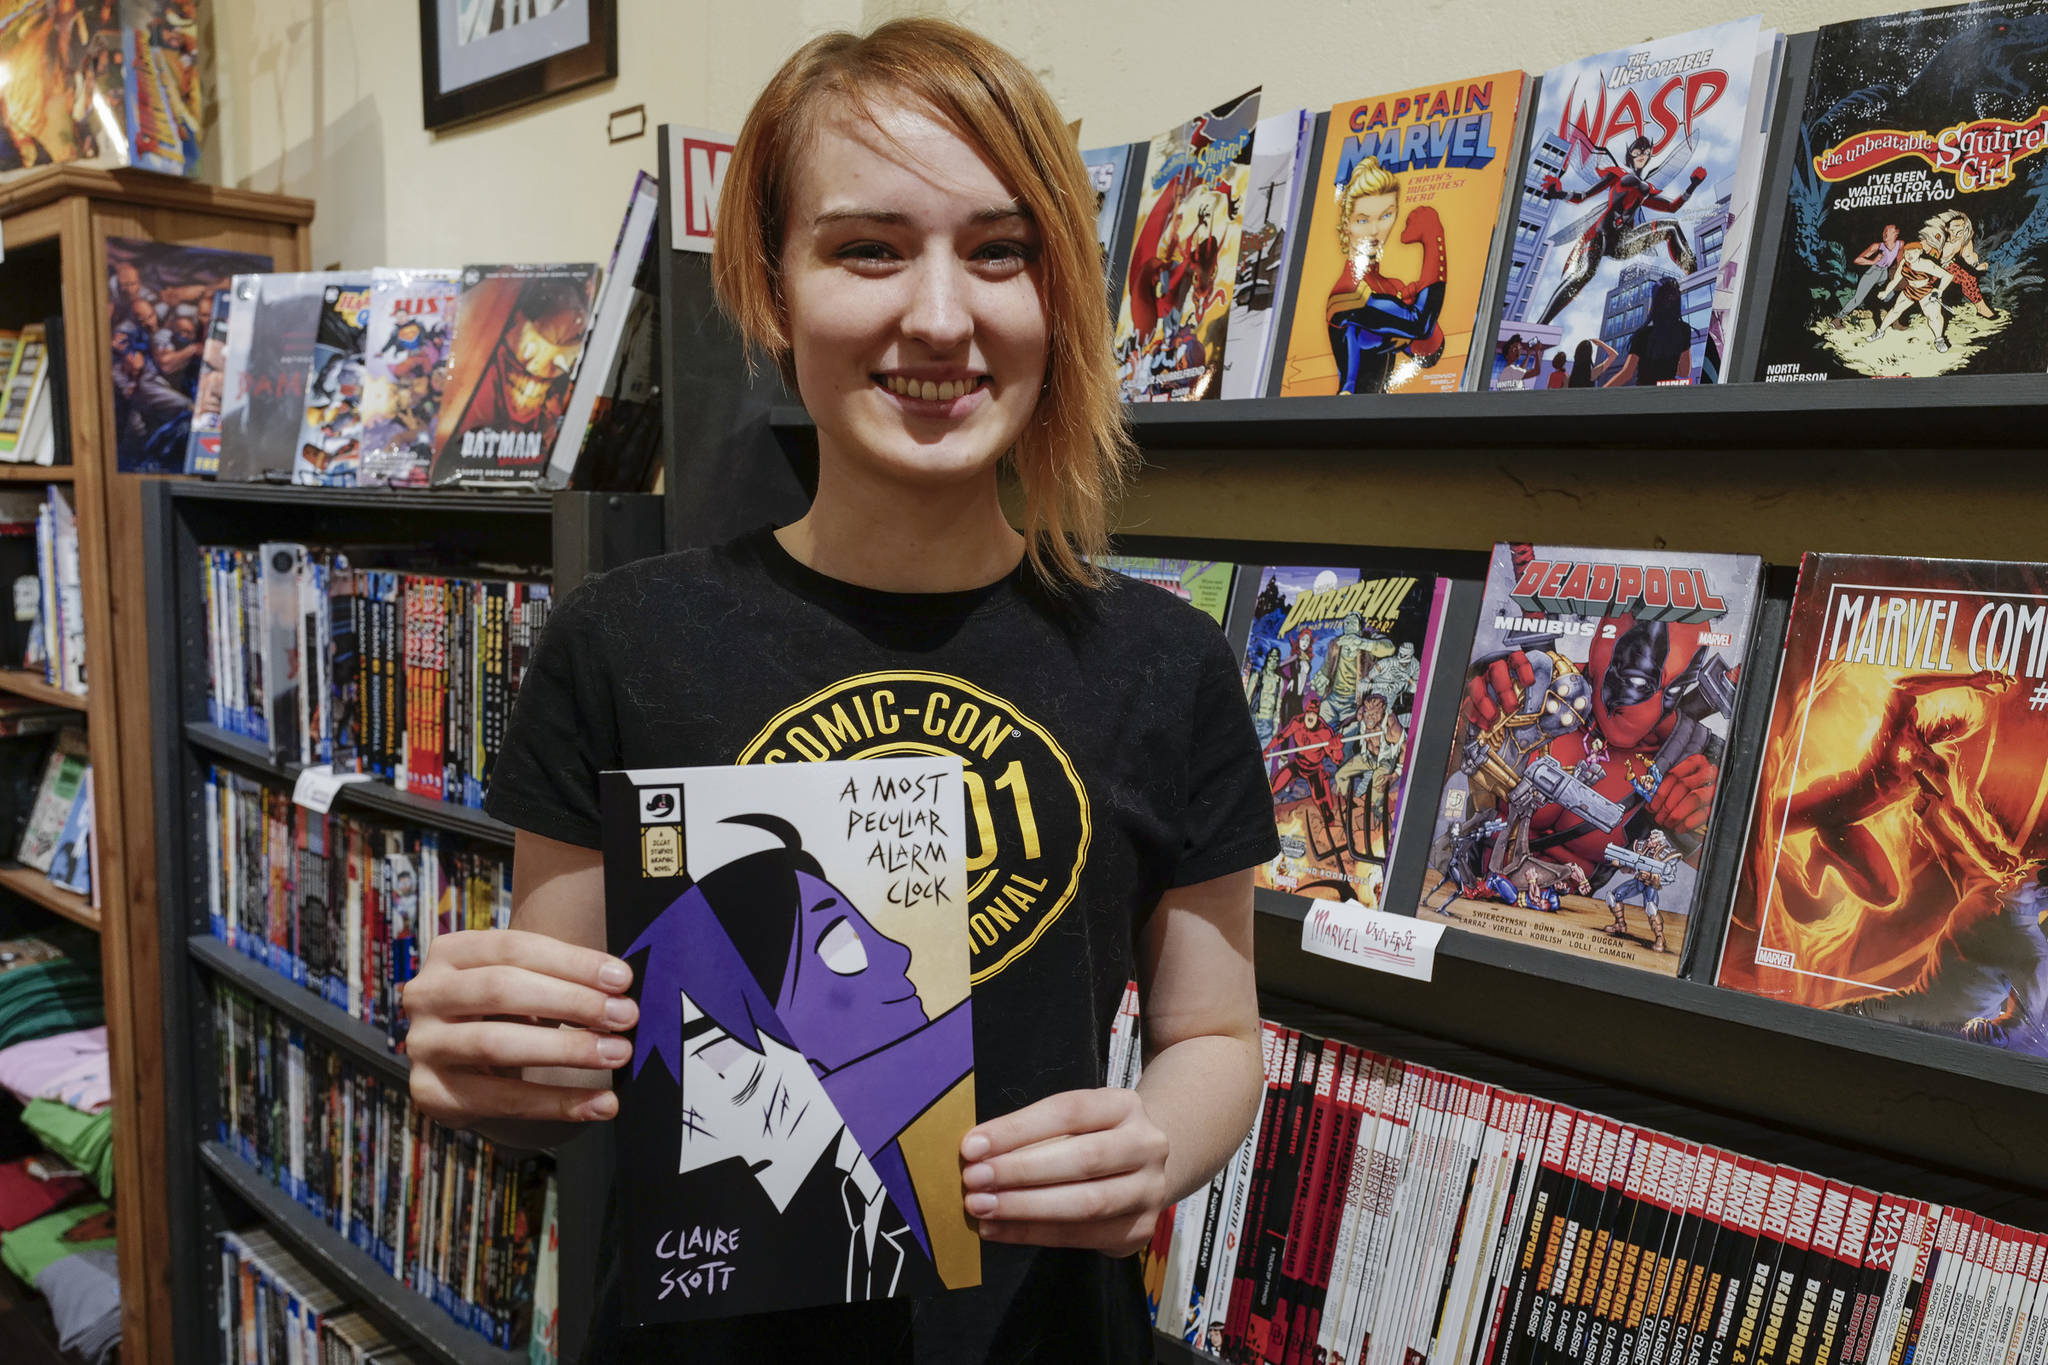 Claire Scott, a senior at Juneau-Douglas High School: Yadaa.at Kalé, has been named a 2021 National Merit Scholarship winner. She is the only student in Alaska to receive the honor this year. In addition to a perfect grade point average, she has published two graphic novels. Here, she shows off her second published comic book, A Most Peculiar Alarm Clock, at Alaska Robotics Gallery on Tuesday, Nov. 12, 2019. (Michael Penn /Juneau Empire File)